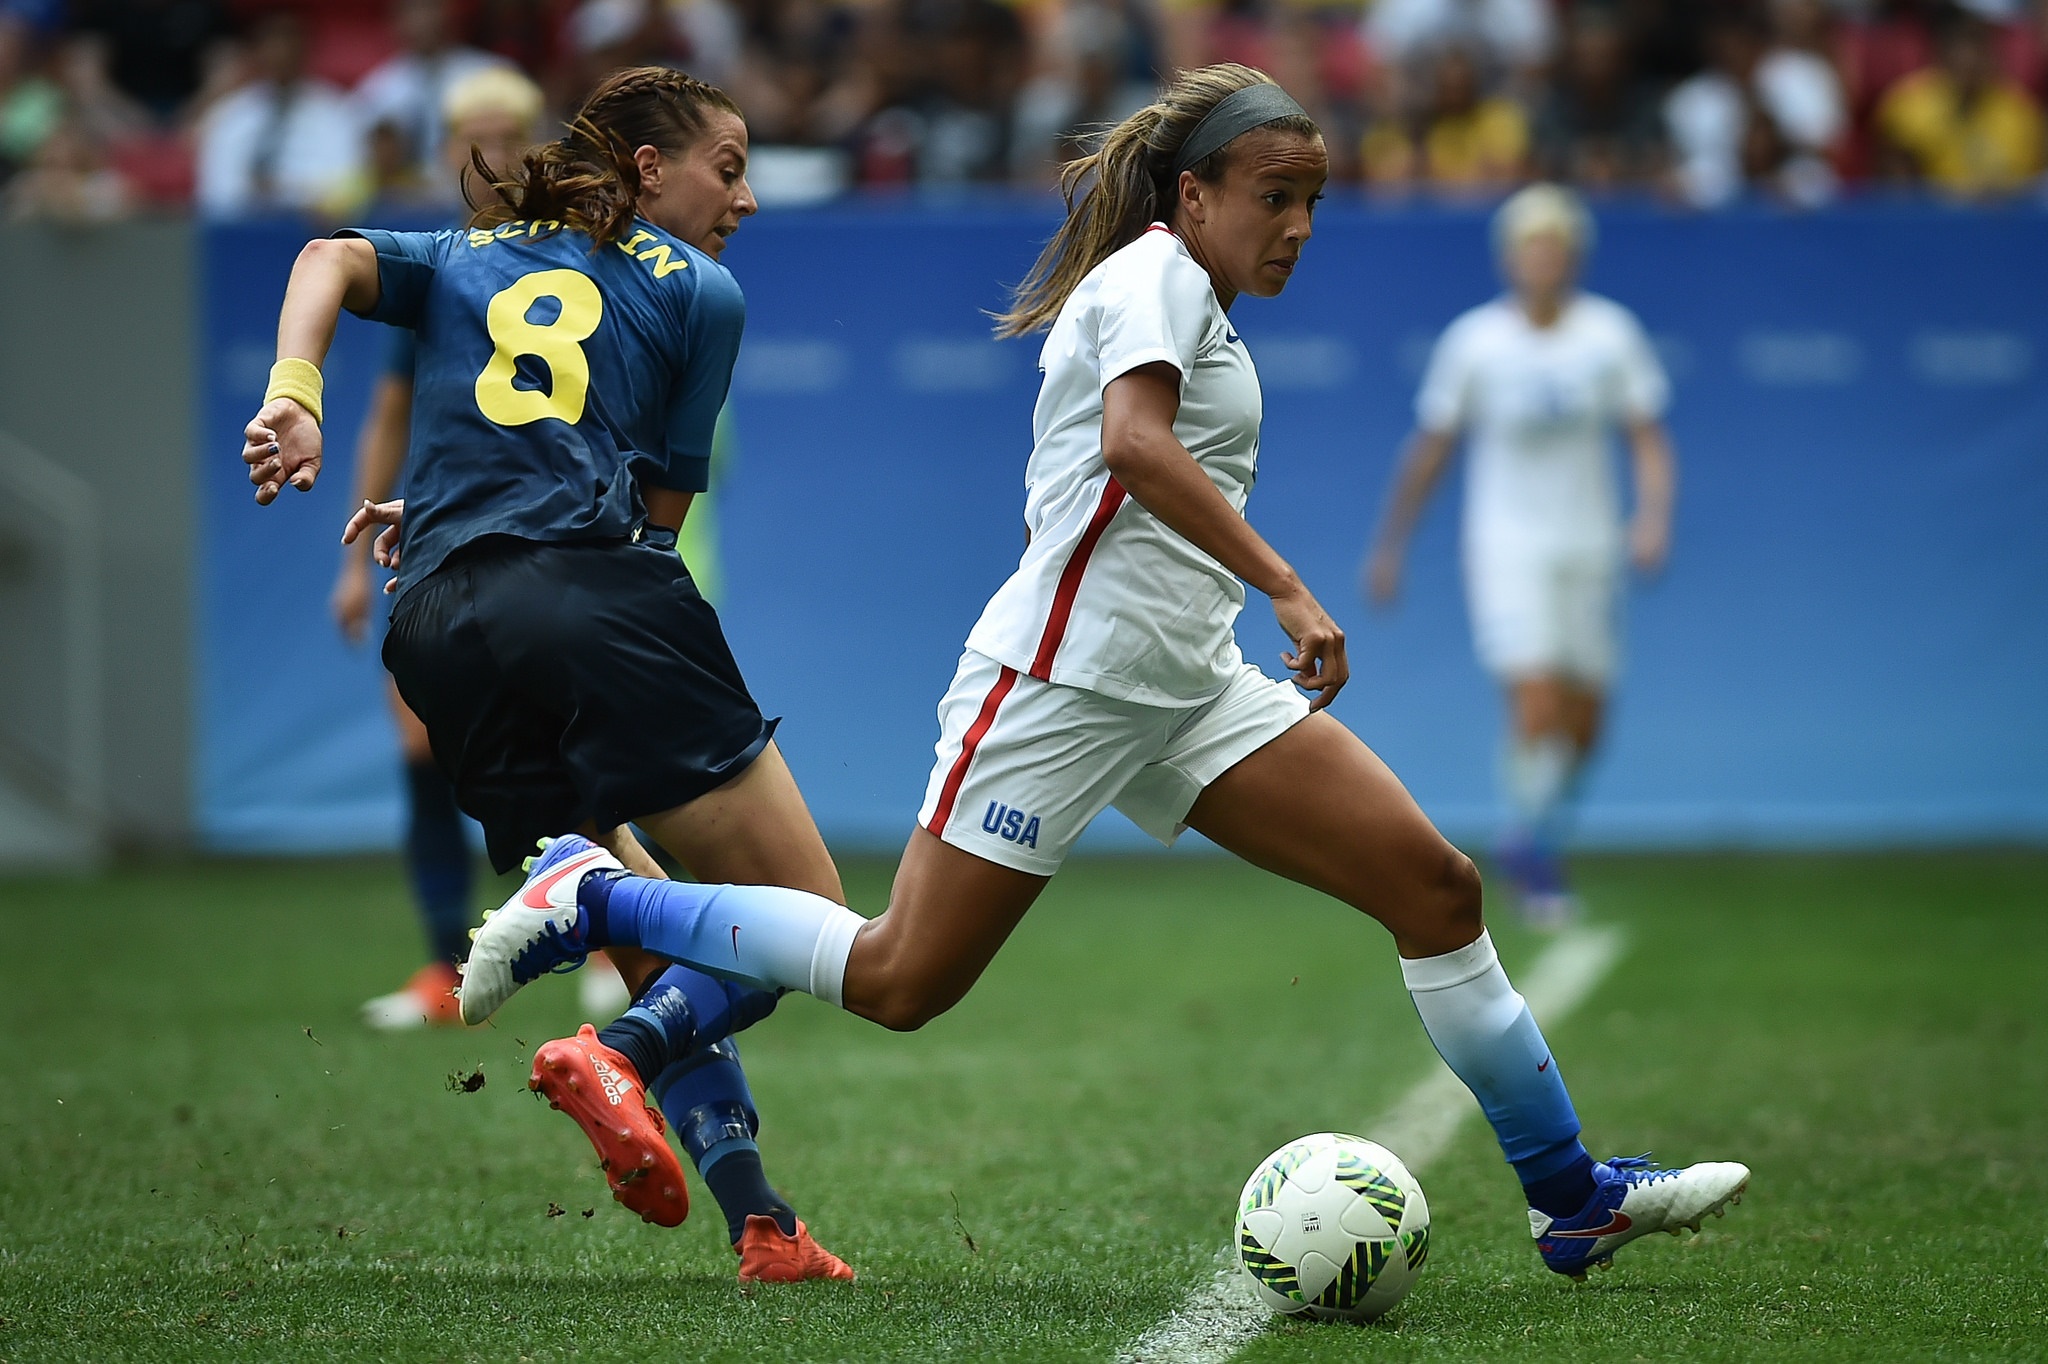 ACL Injuries in Women’s Soccer: Early Prevention